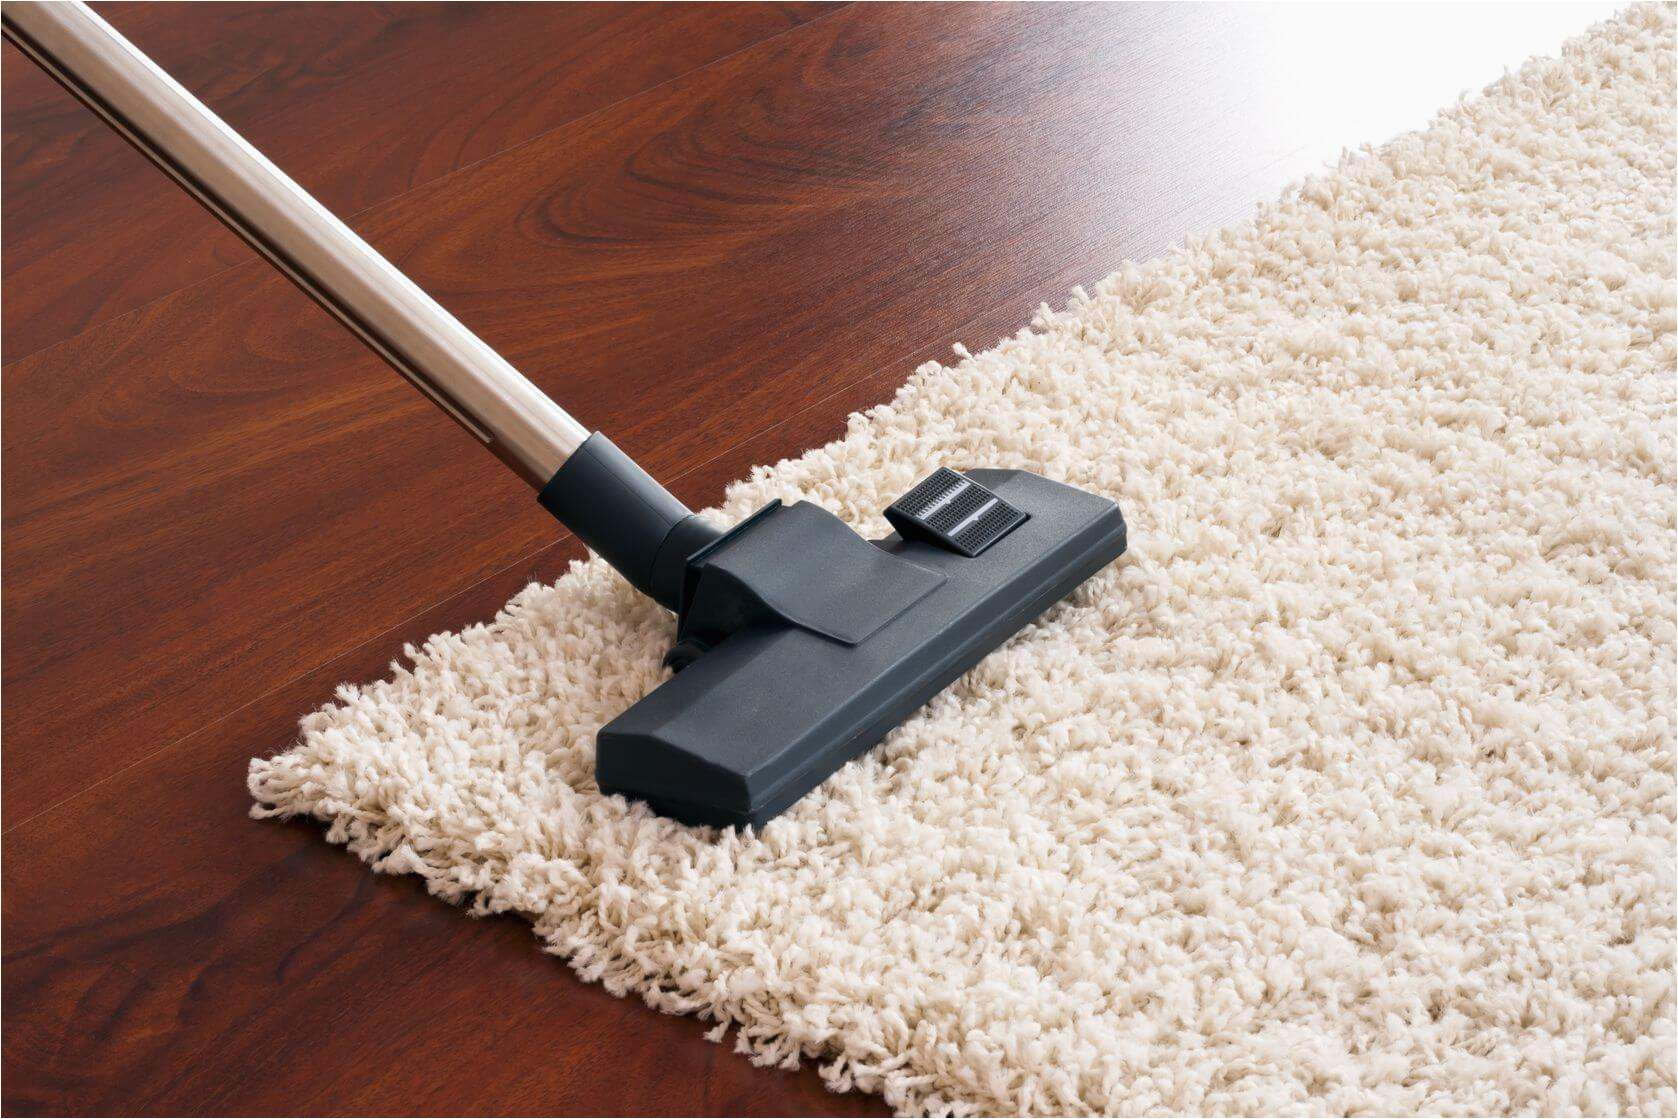 Area Rug Carpet Cleaning Services How to Clean area Rugs Superpages